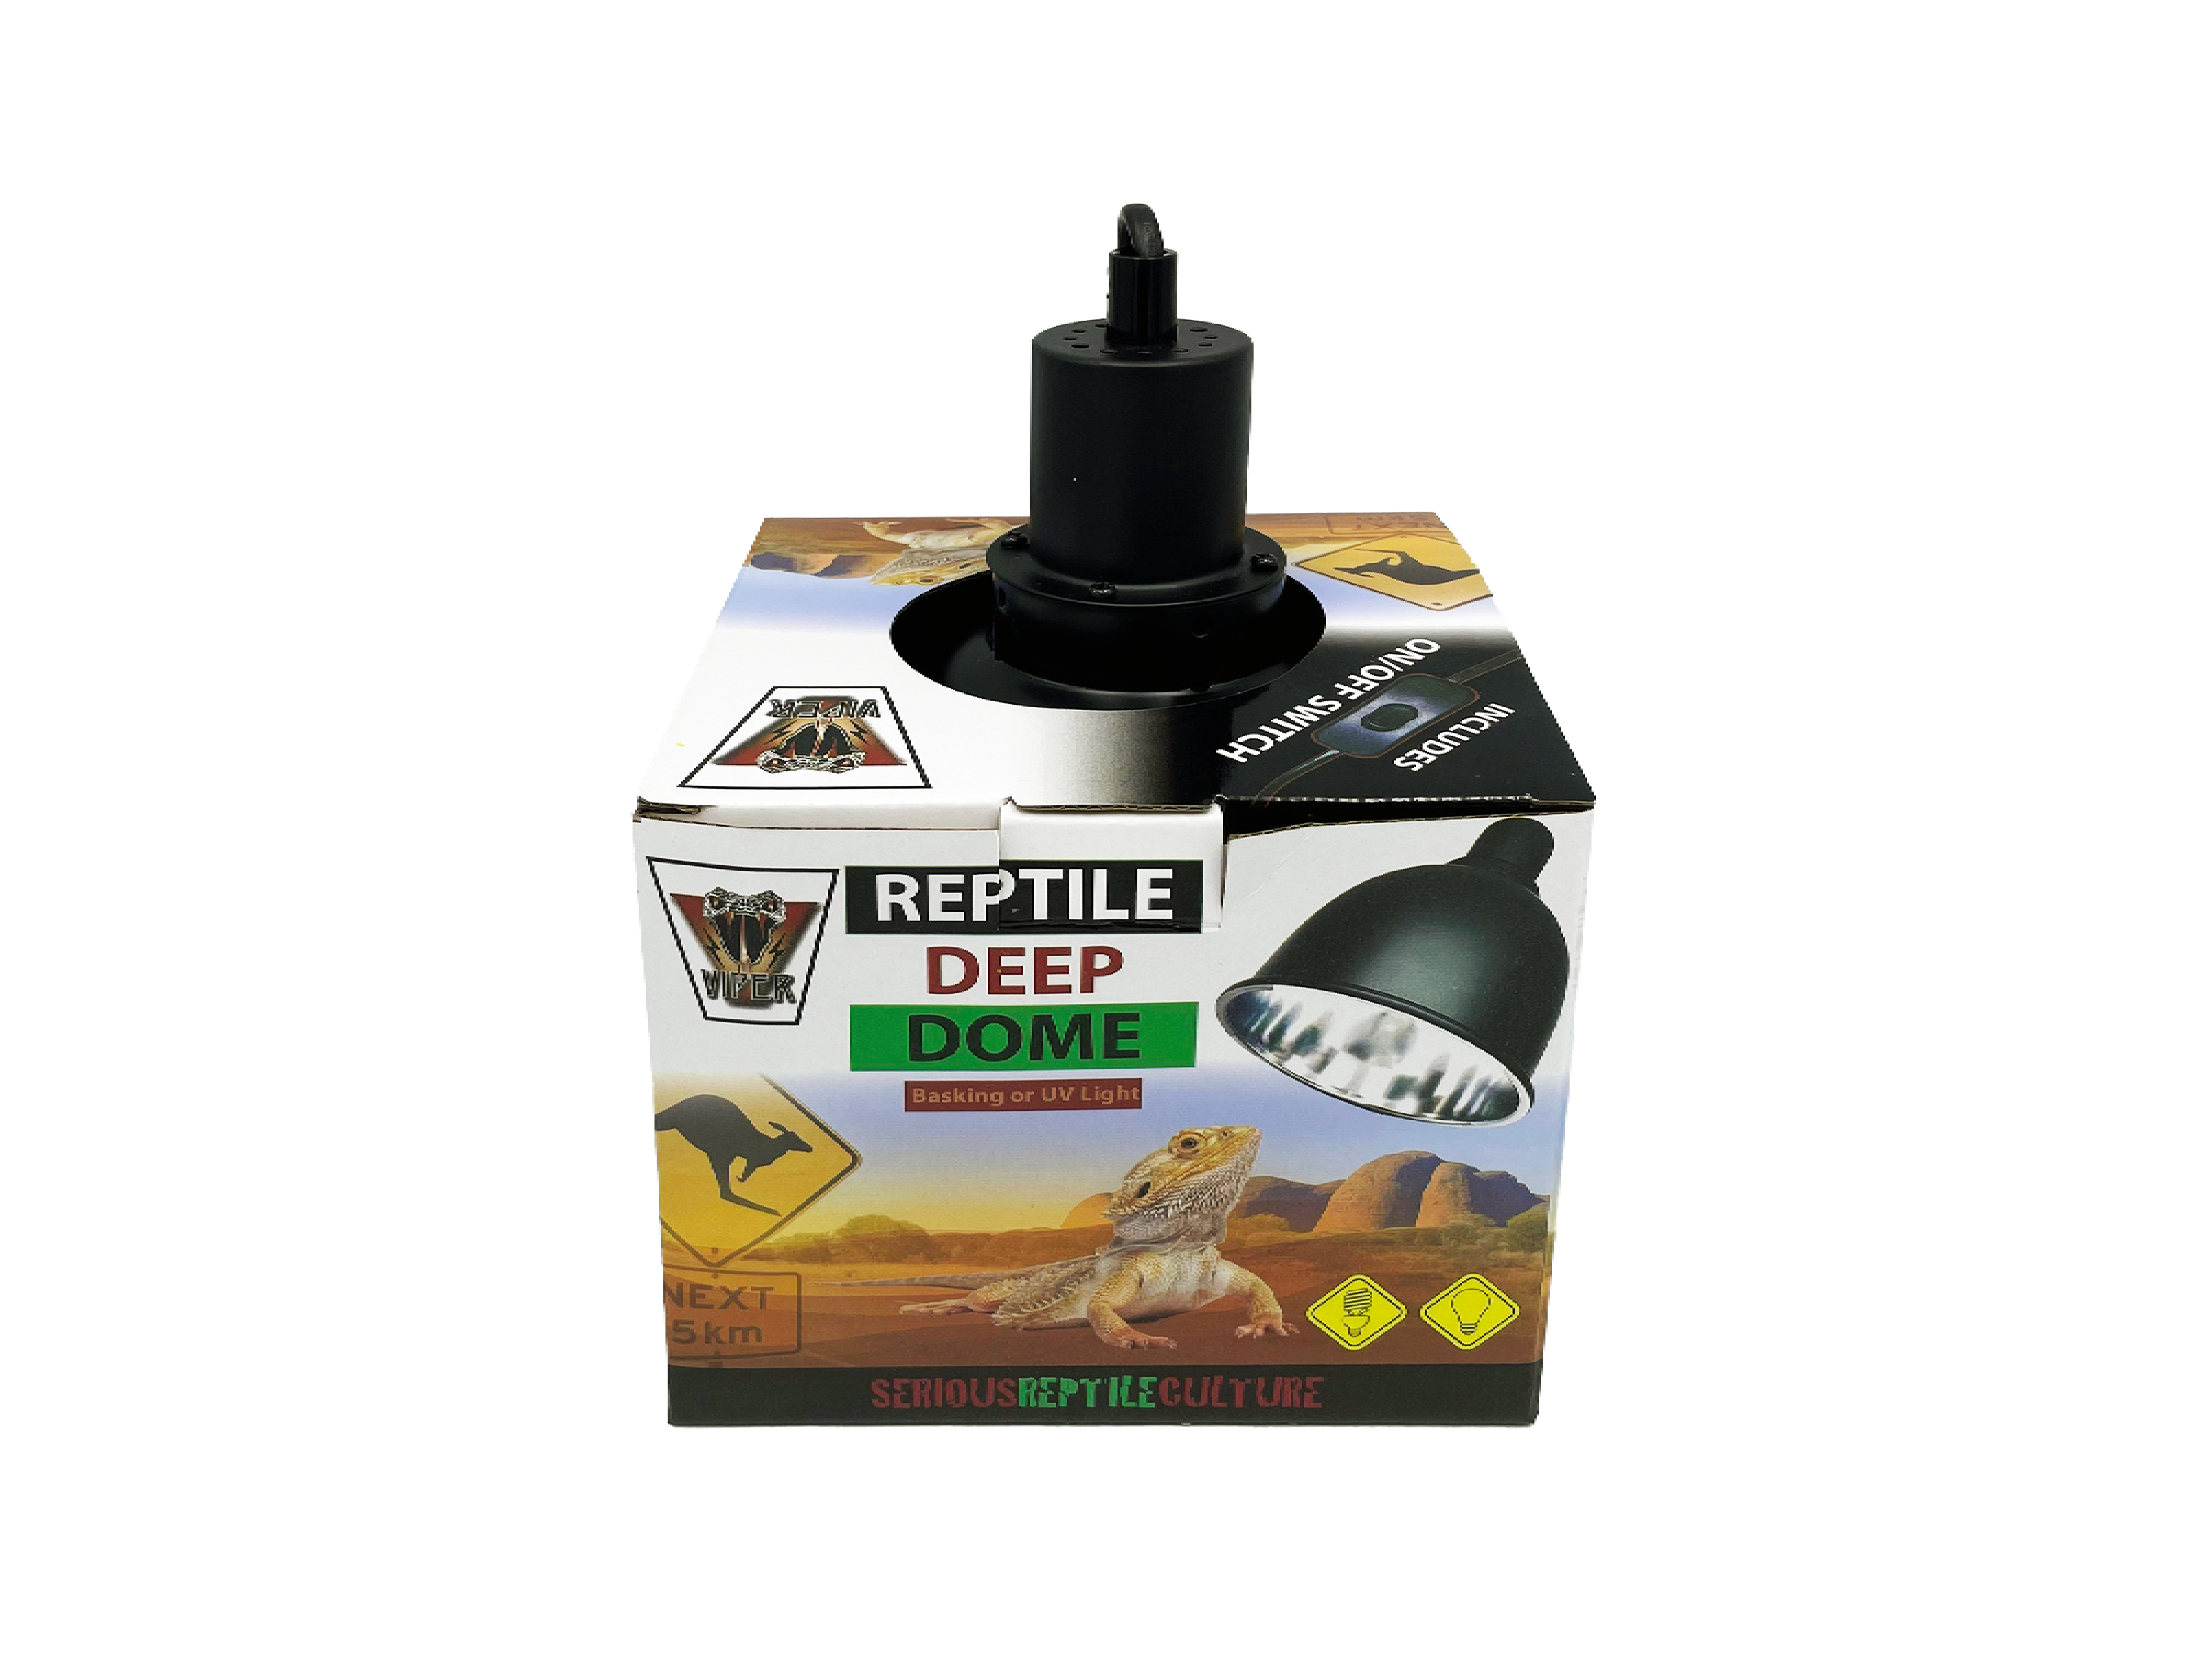 Reptile Deep Dome Light Fitting